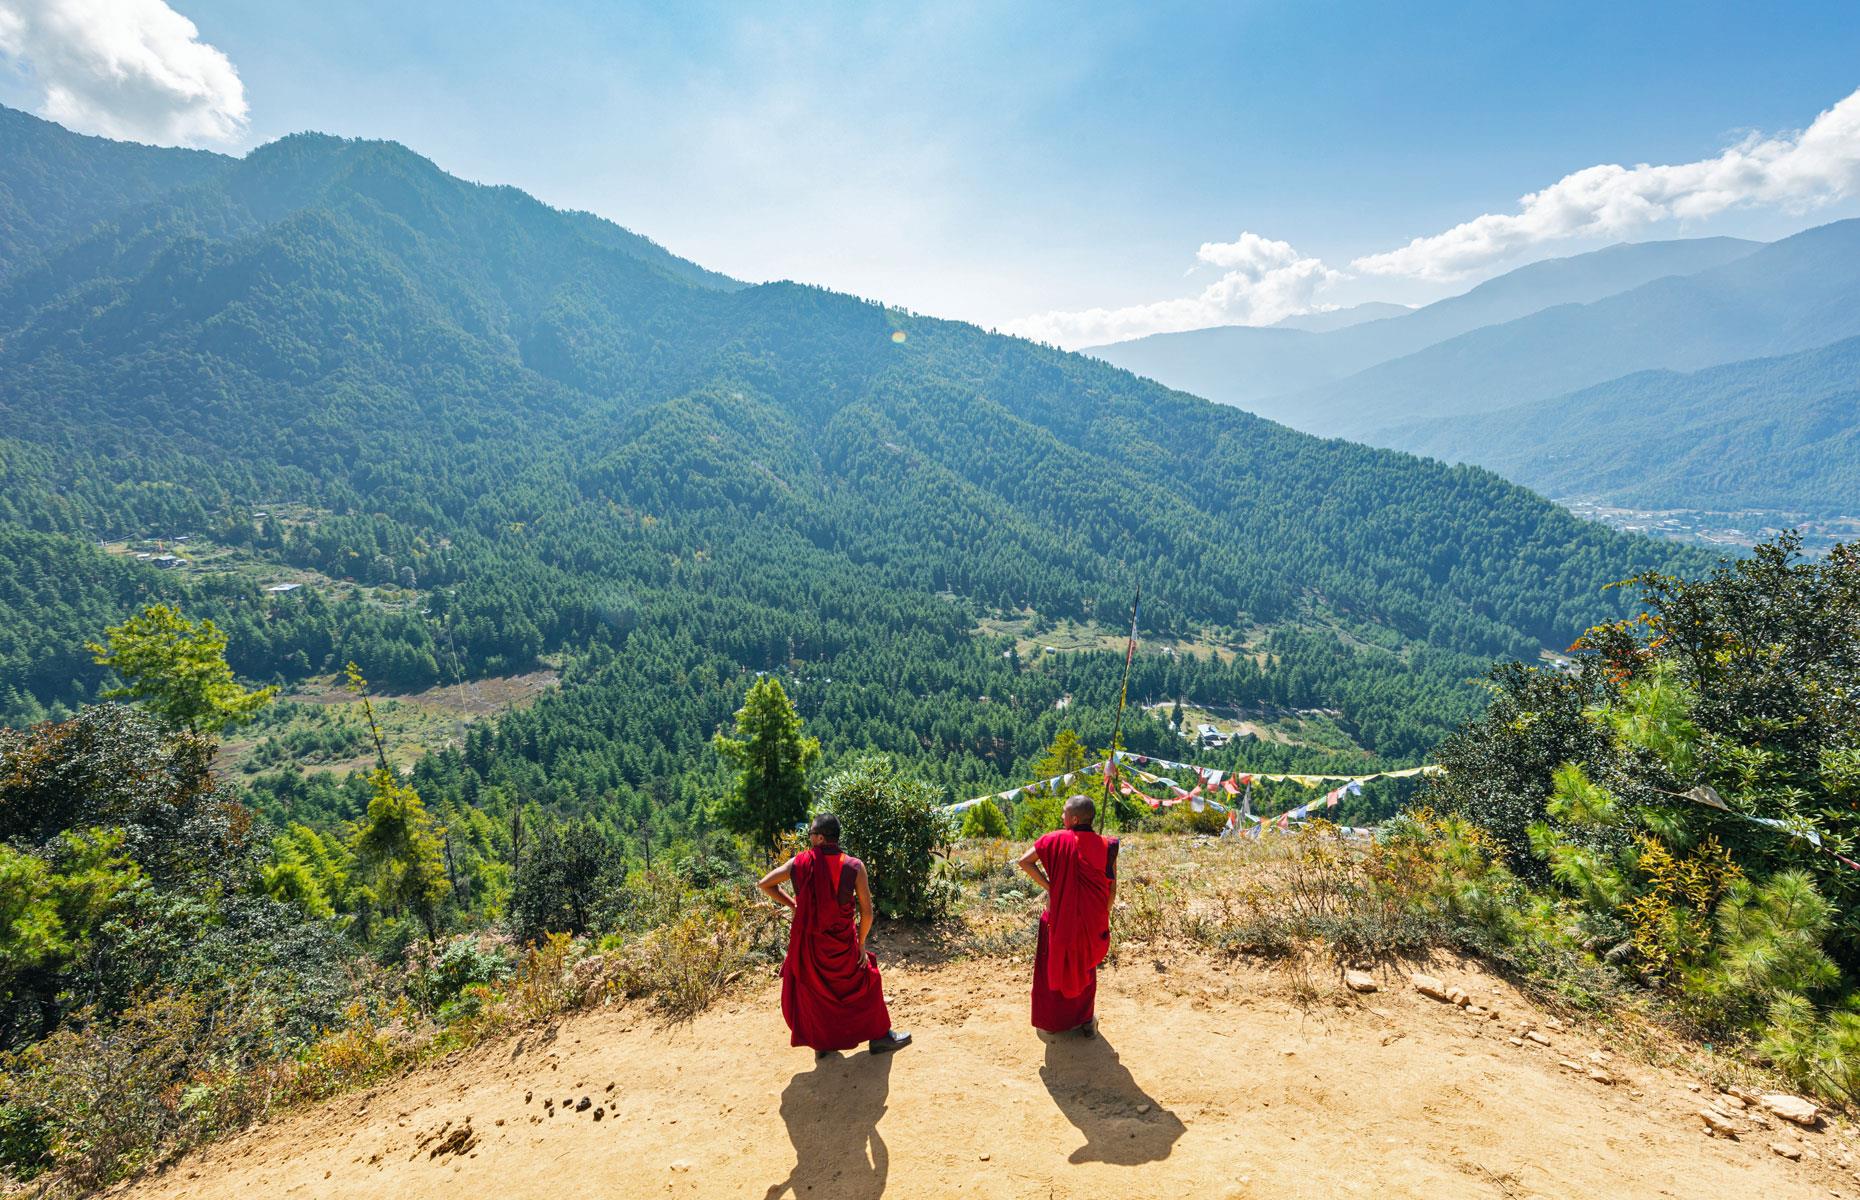 Bhutan (and seven other countries): Already there